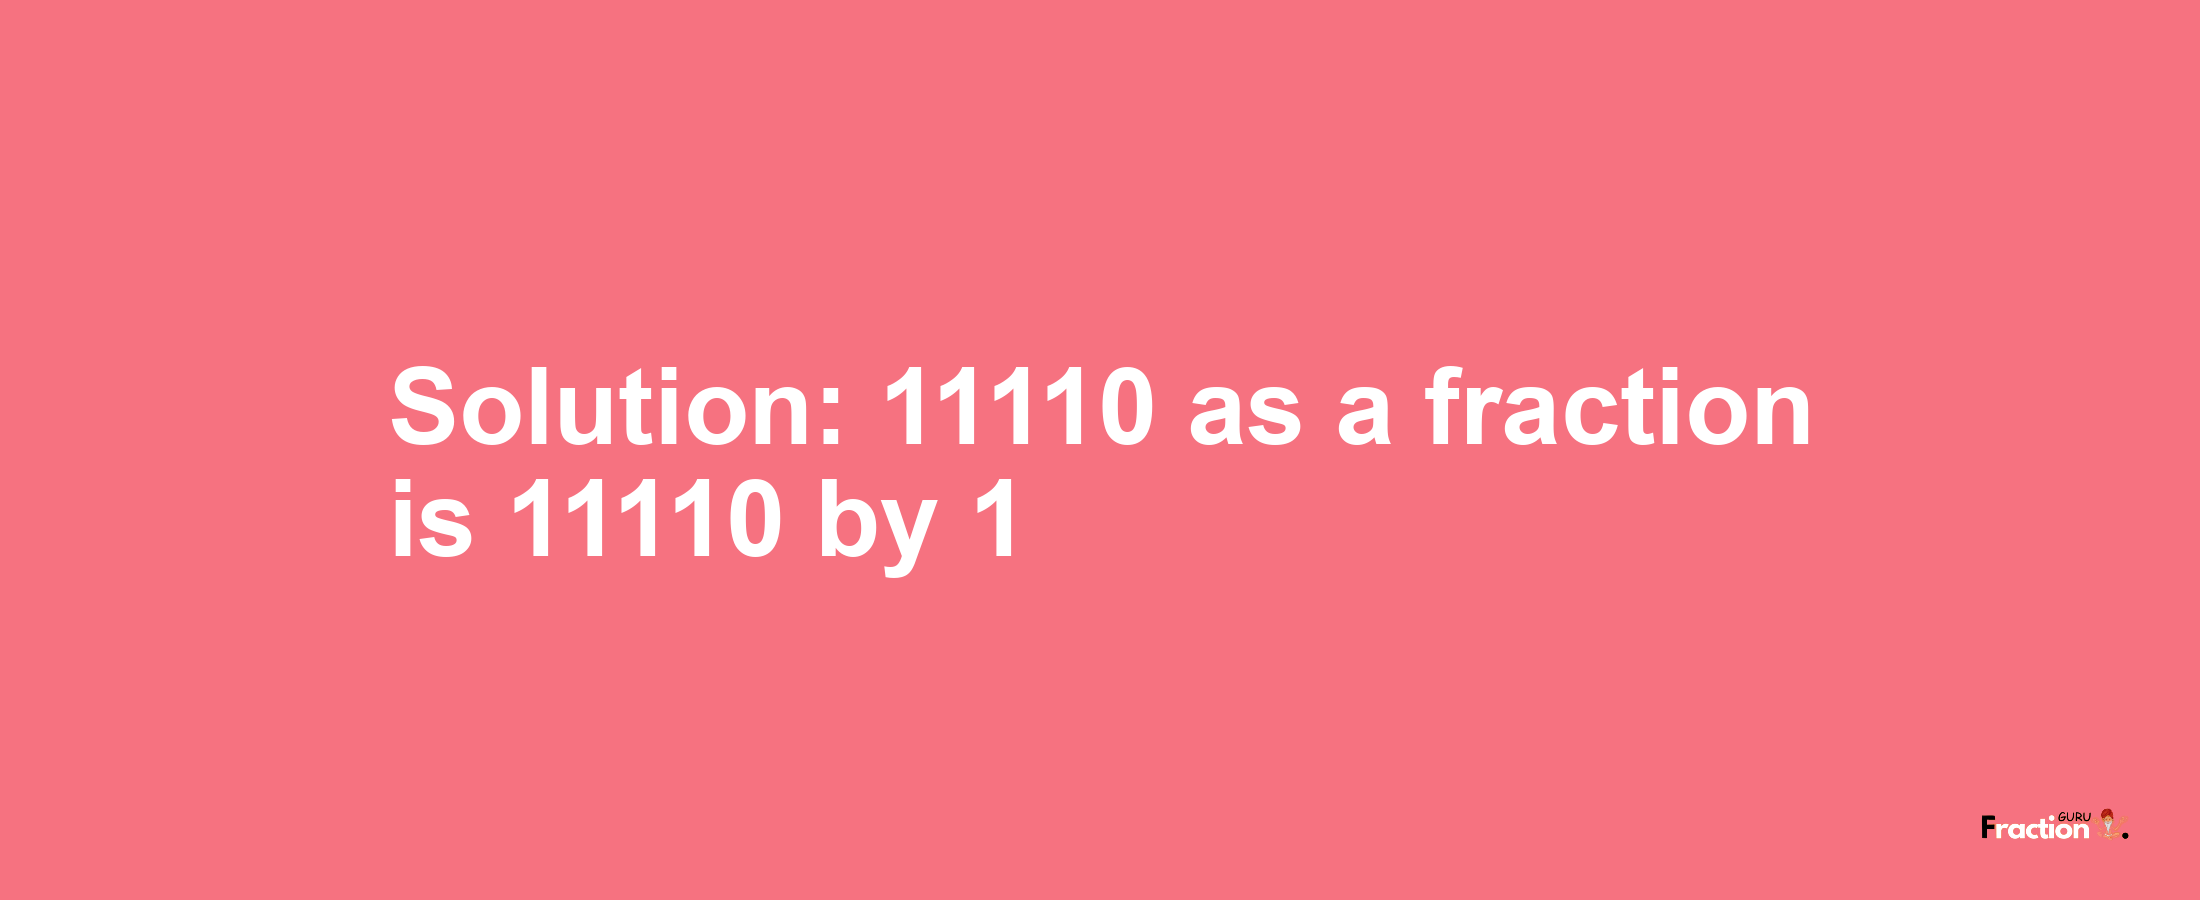 Solution:11110 as a fraction is 11110/1